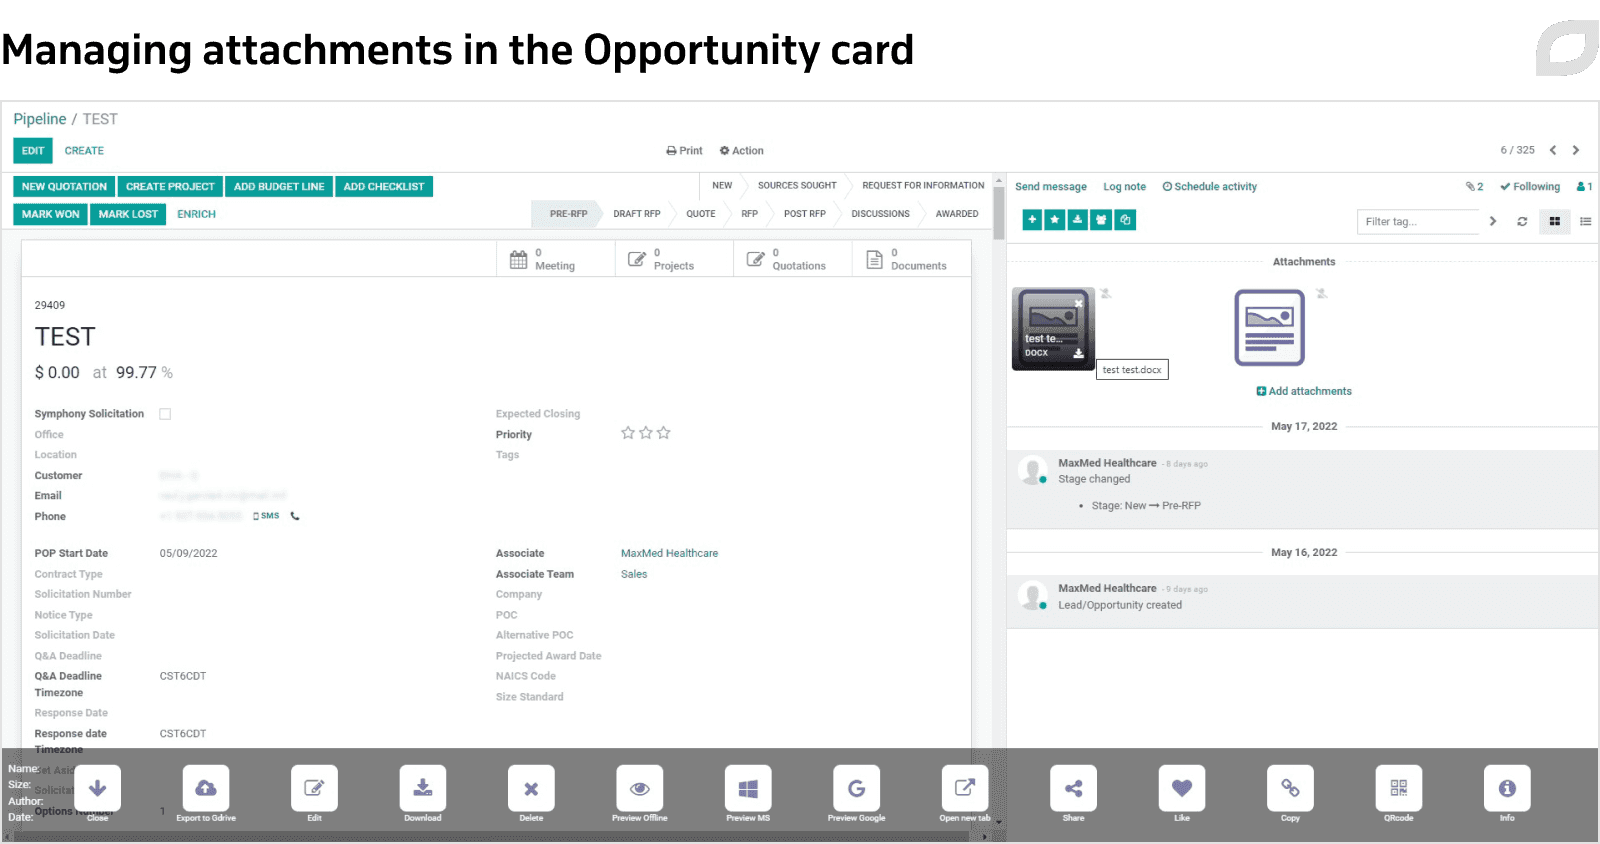 Managing attachments in the Opportunity card